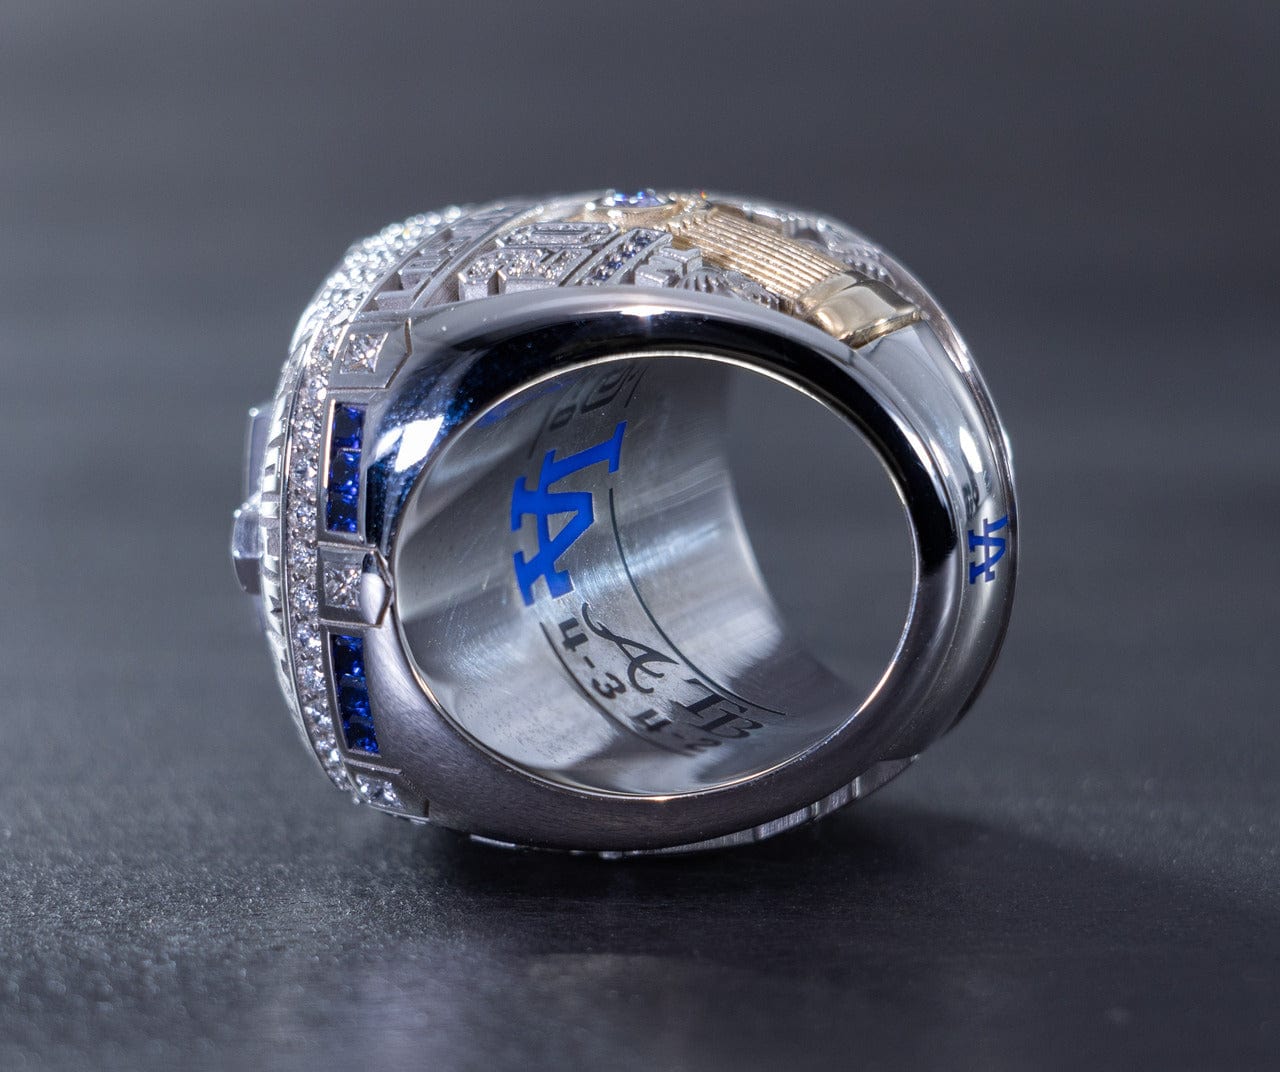 2020 Dodgers Championship Ring Right